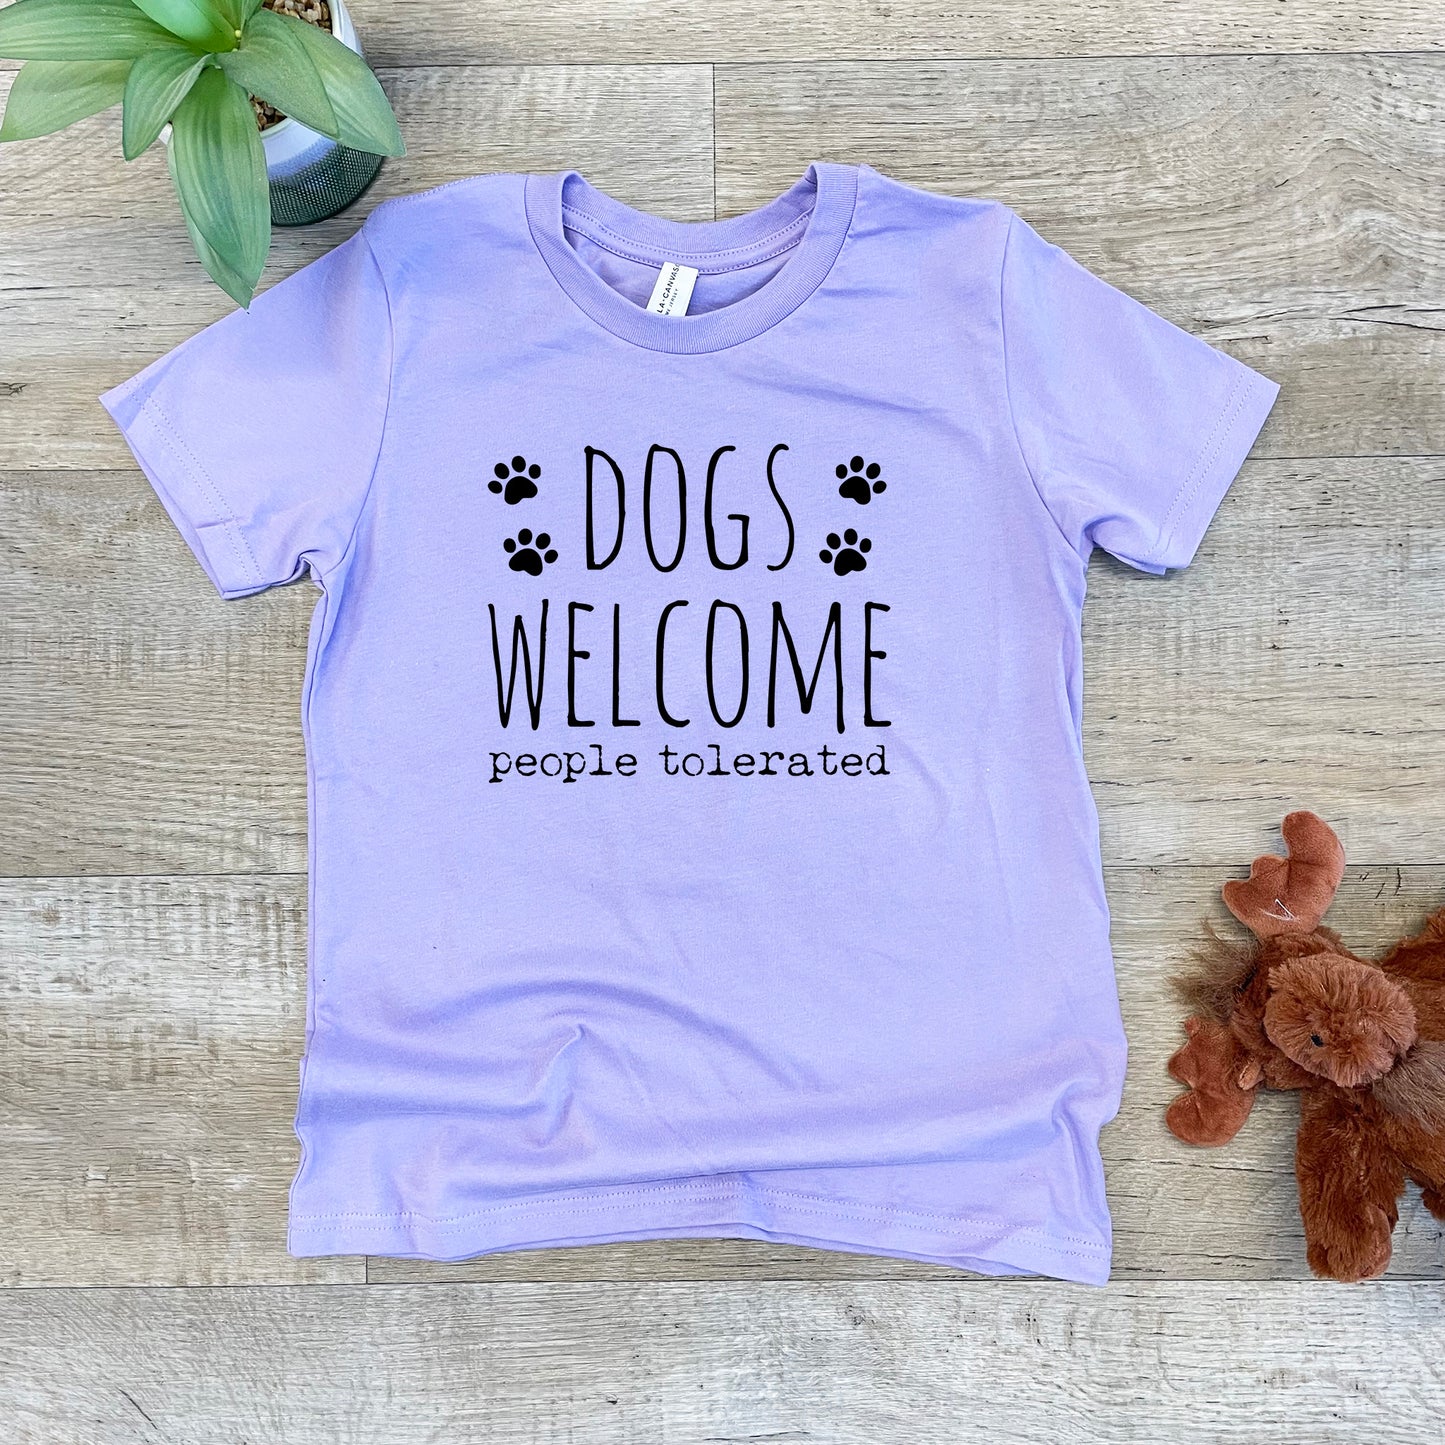 Dogs Welcome, People Tolerated - Kid's Tee - Columbia Blue or Lavender